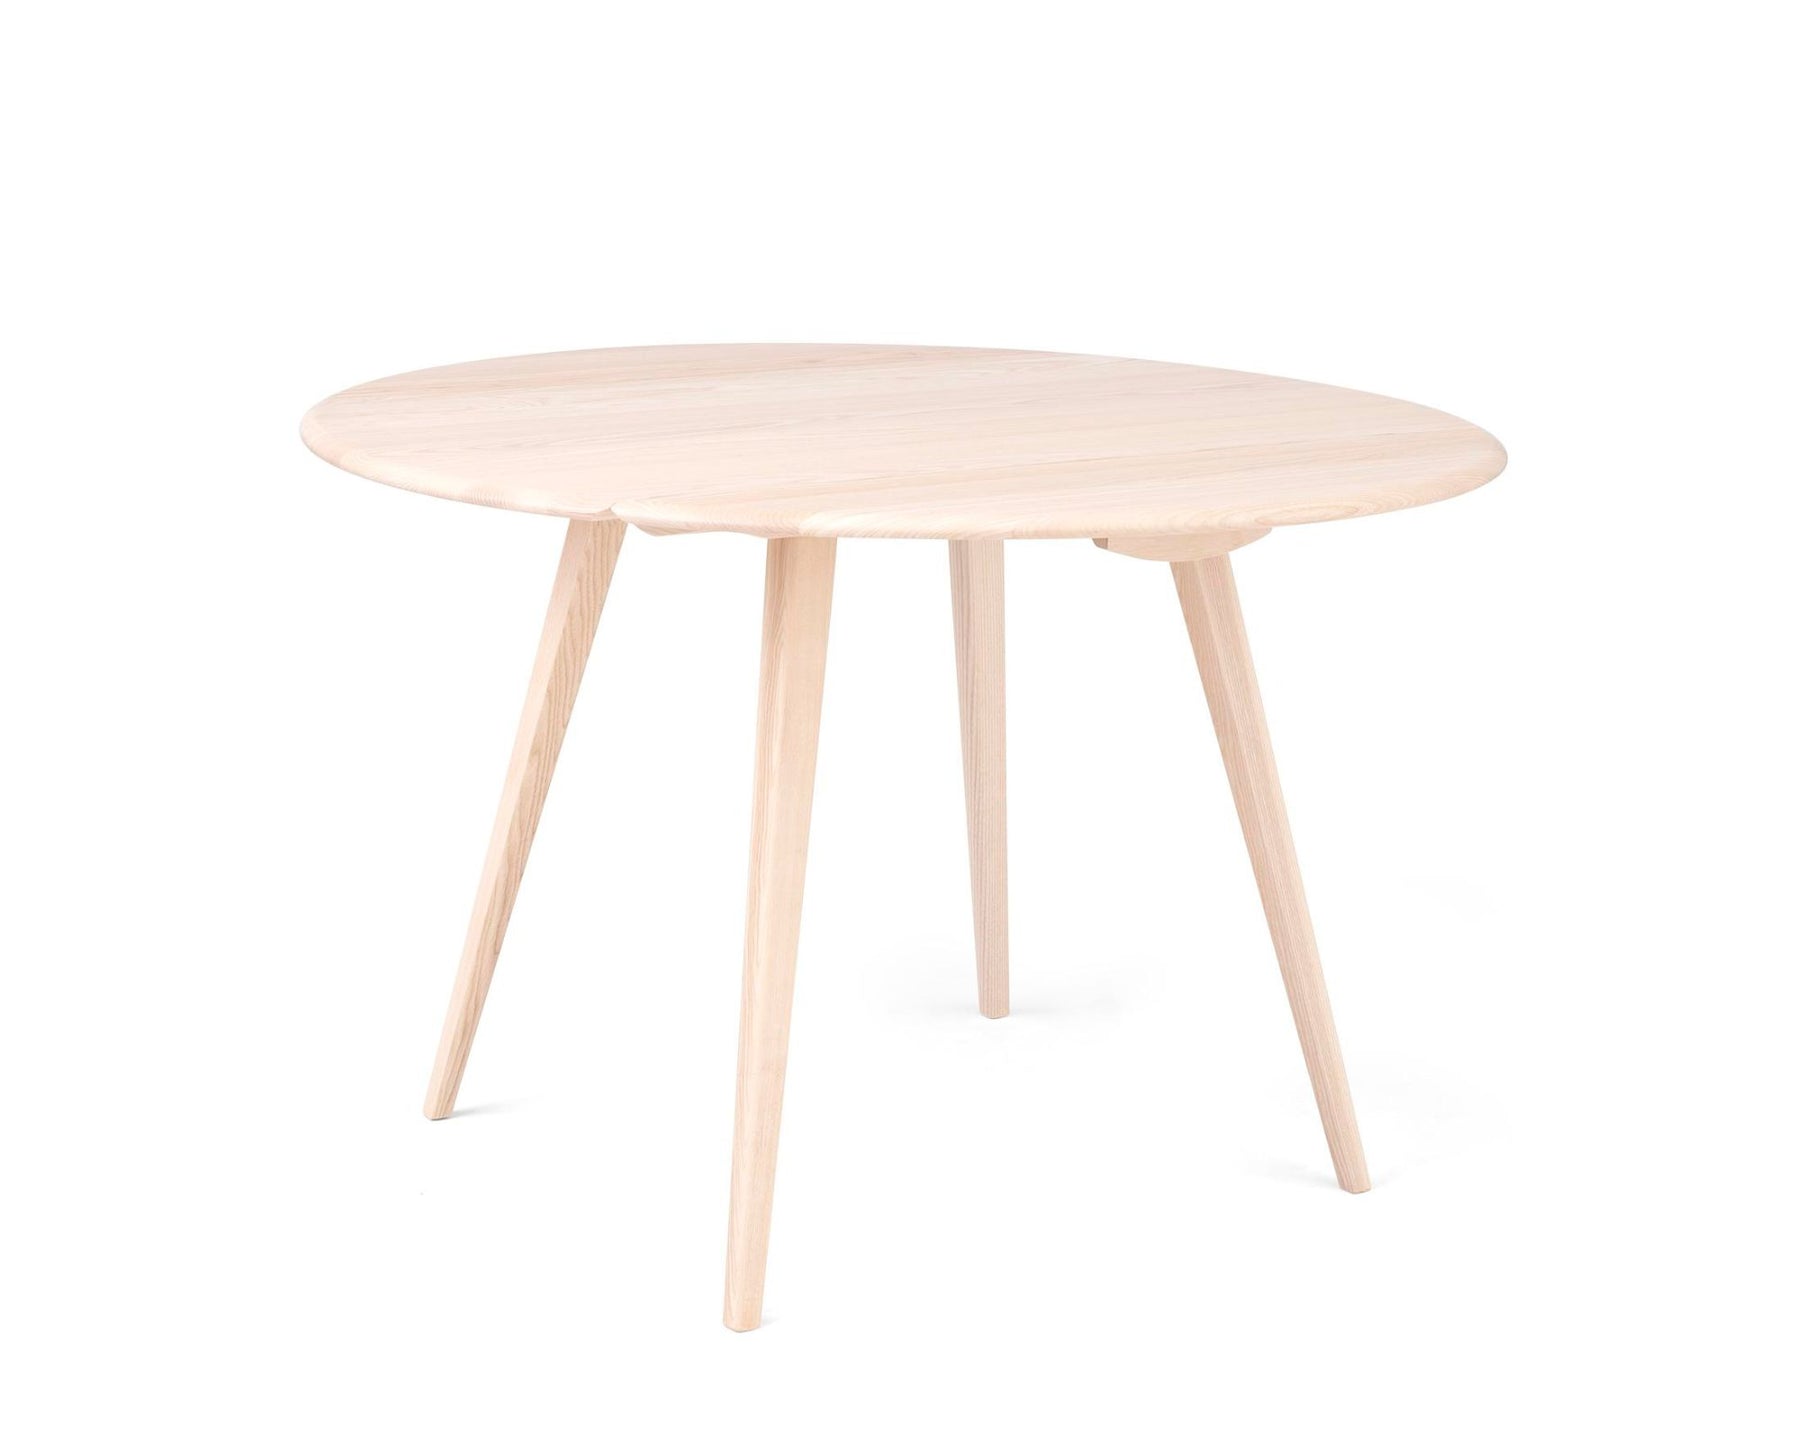 Small Round Drop Leaf Table | DSHOP